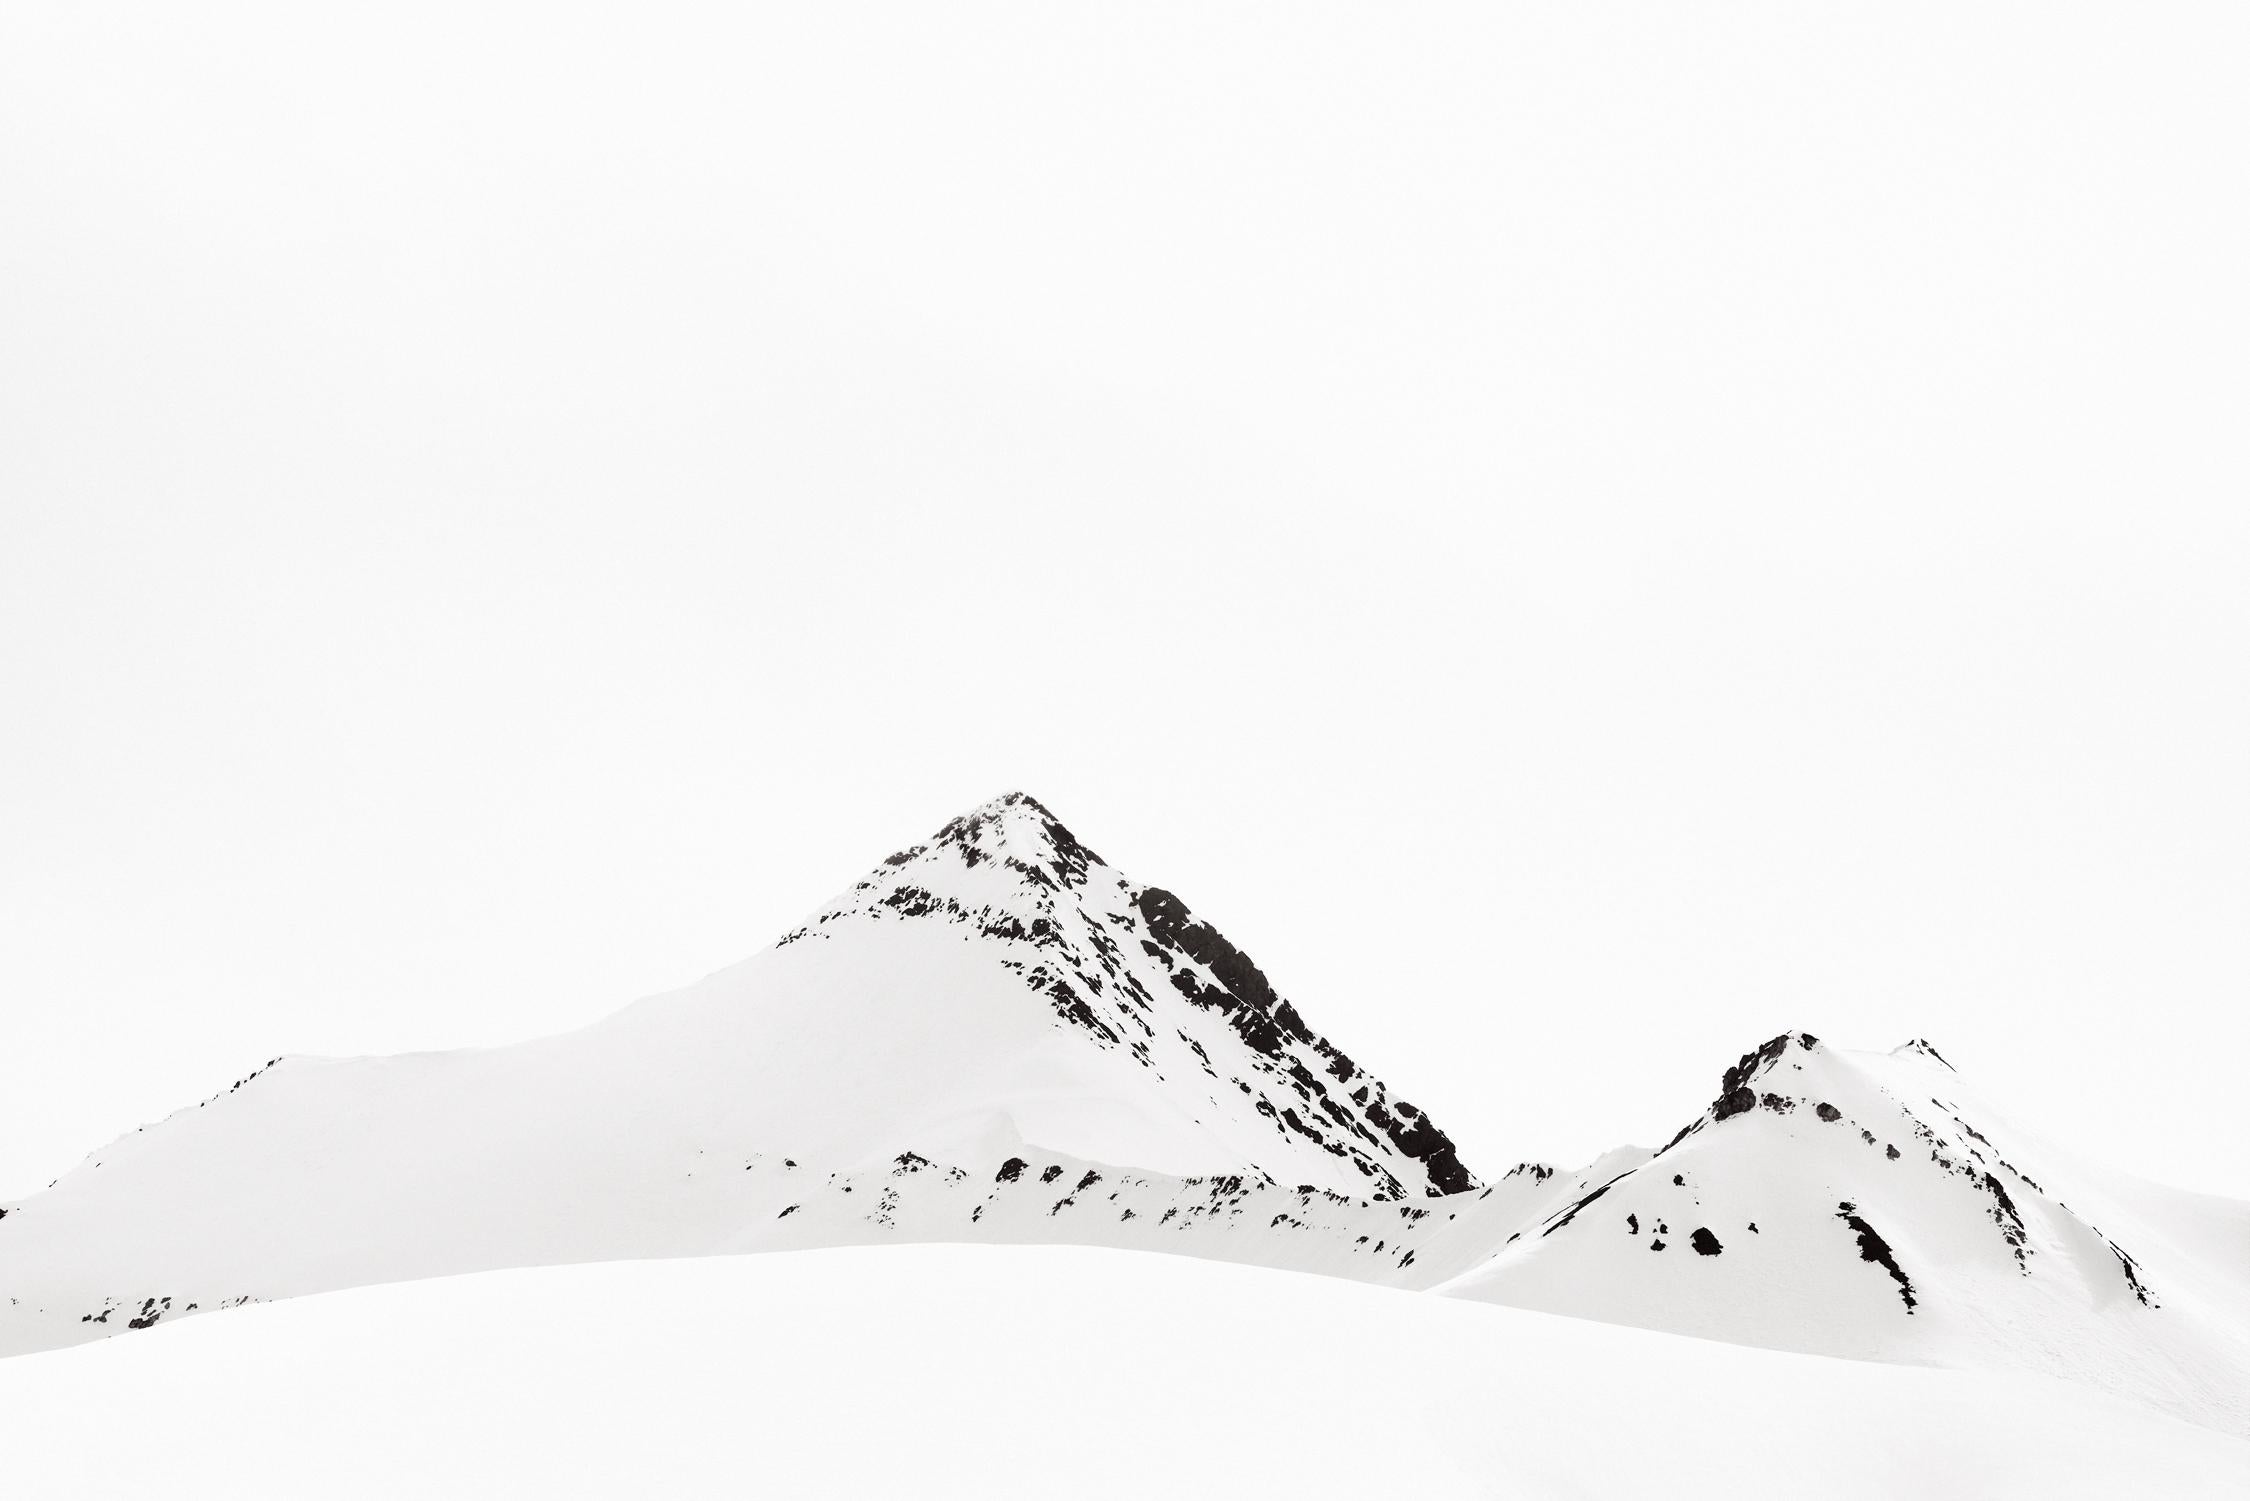 Drew Doggett Black and White Photograph - Abstract, Minimal Image of the Arctic Landscape